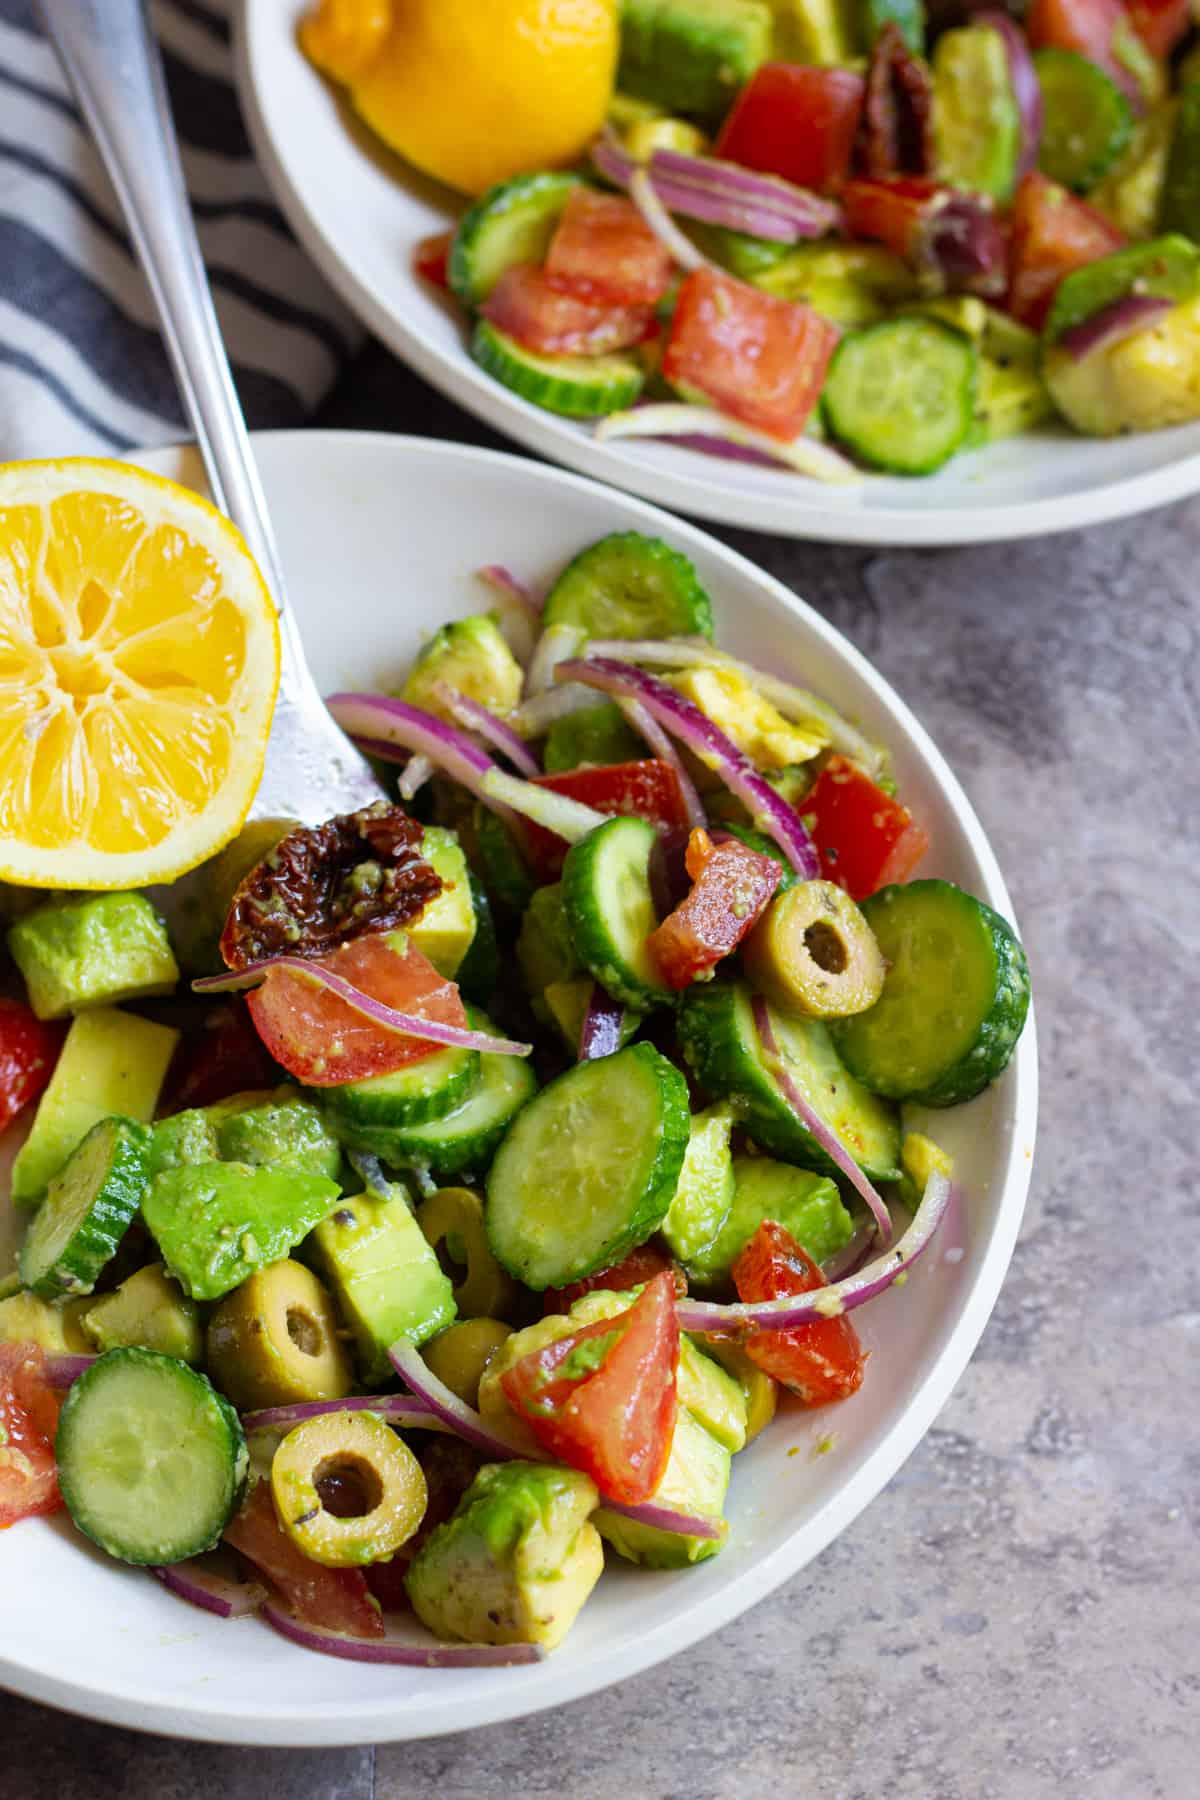 Serve avocado tomato salad in two smaller bowls with lemon.